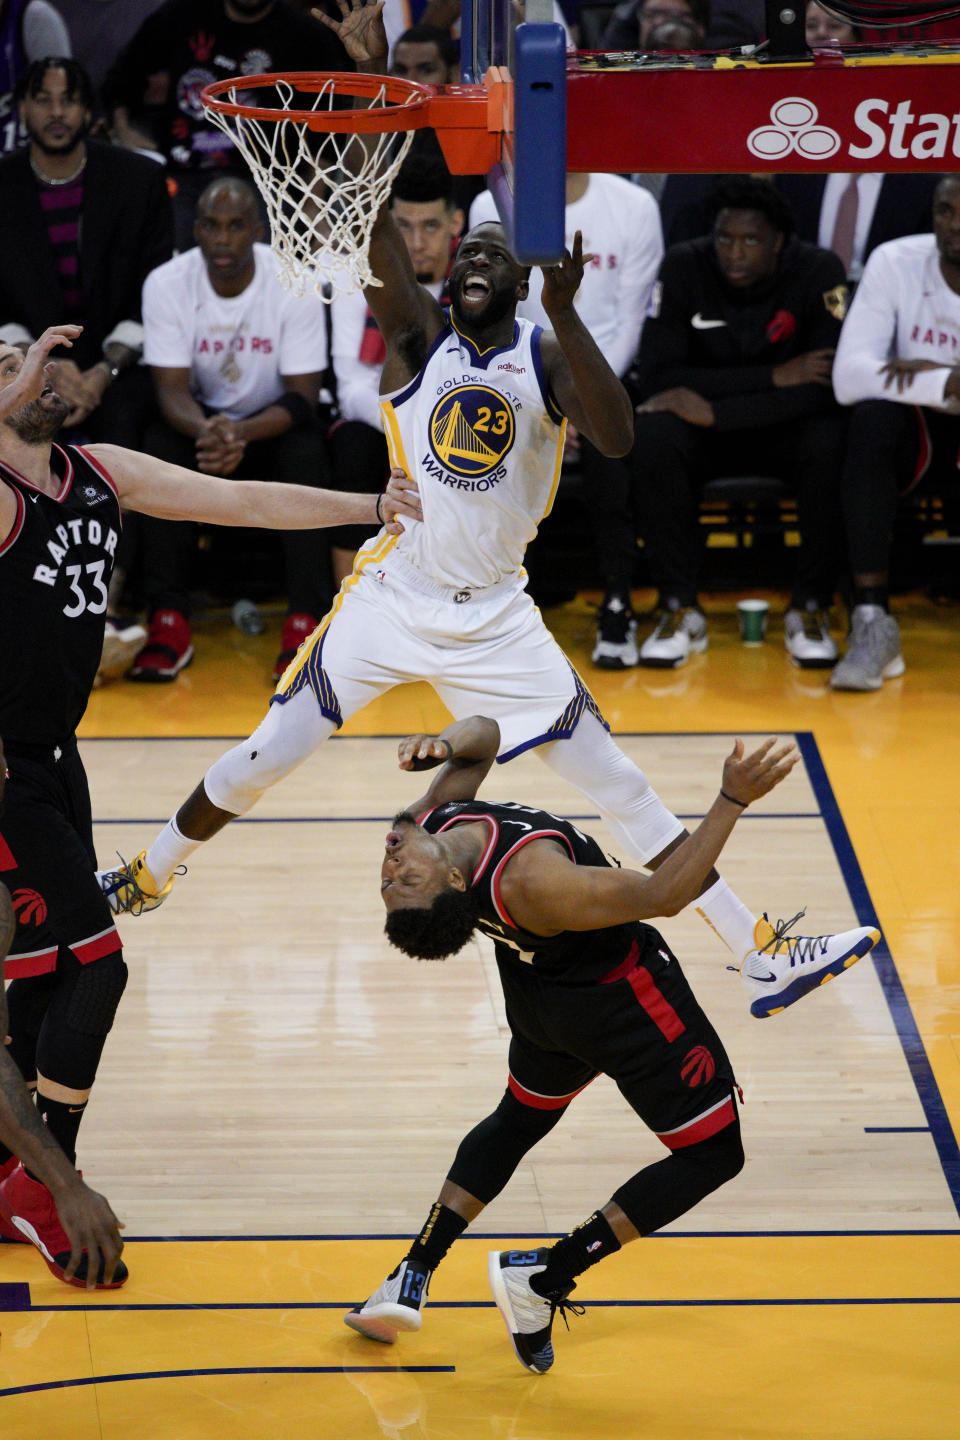 Golden State Warriors forward Draymond Green (23) shoots over Toronto Raptors guard Kyle Lowry during the first half of Game 3 of basketball's NBA Finals in Oakland, Calif., Wednesday, June 5, 2019. (AP Photo/Tony Avelar)